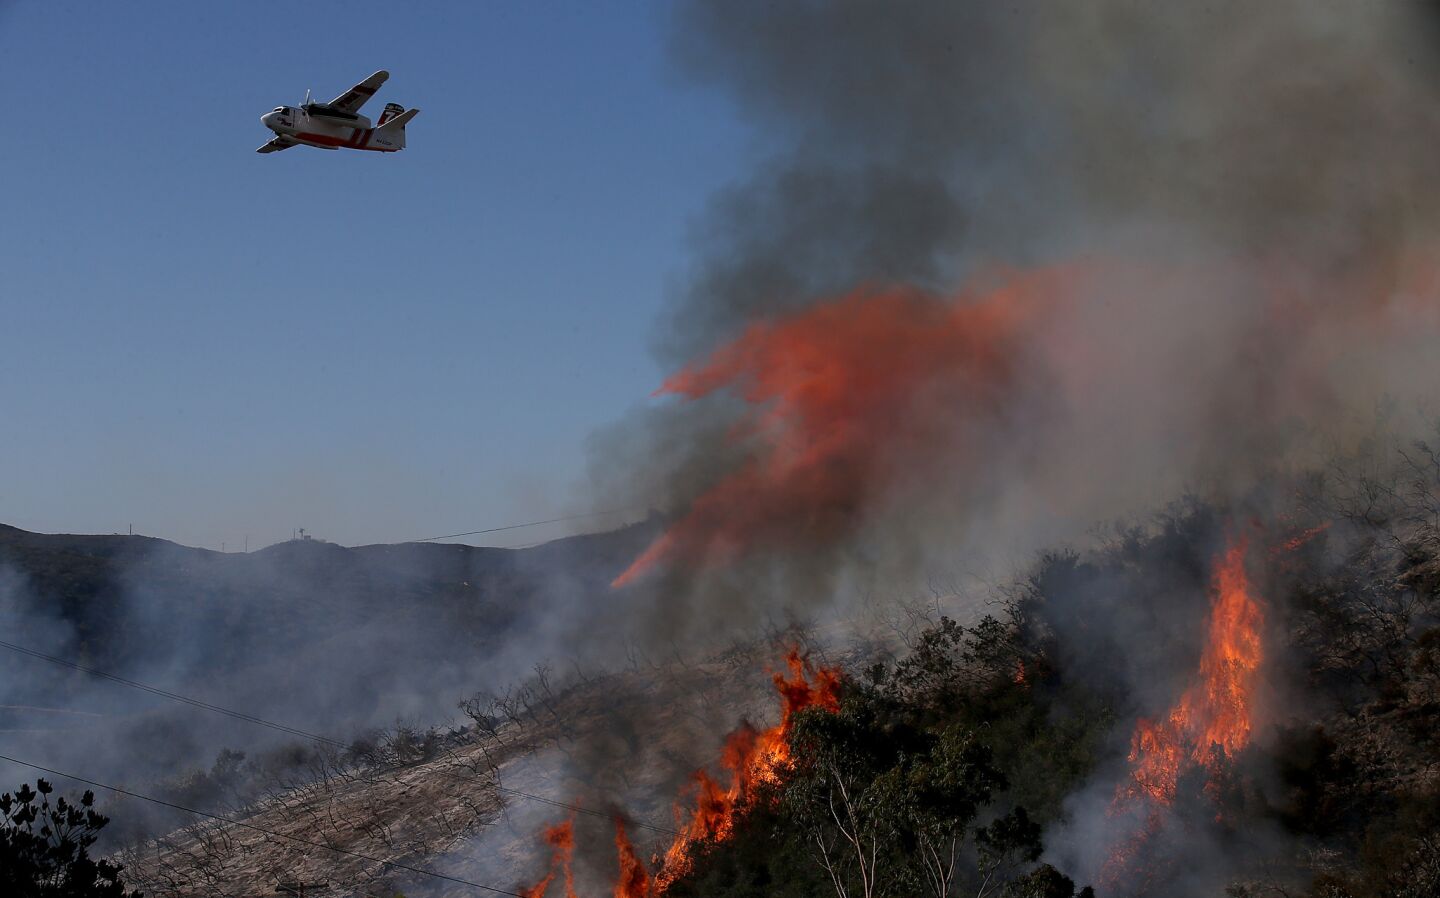 A firefighting airplane drops fire retardant on burning brush along Crestwind Spur Road in San Marcos.